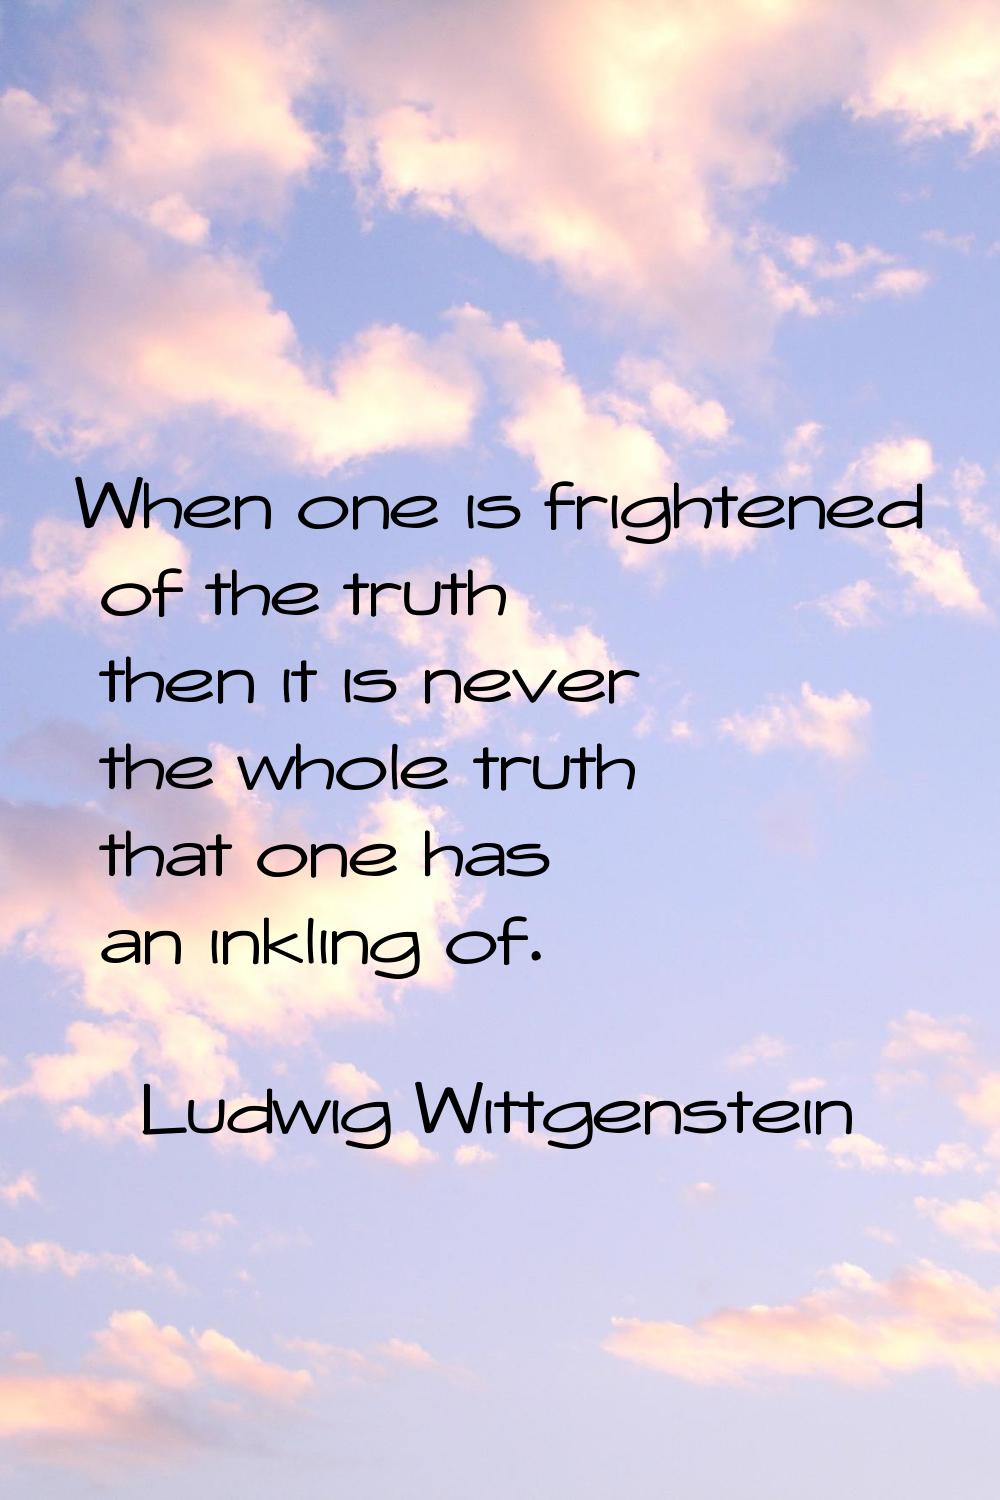 When one is frightened of the truth then it is never the whole truth that one has an inkling of.